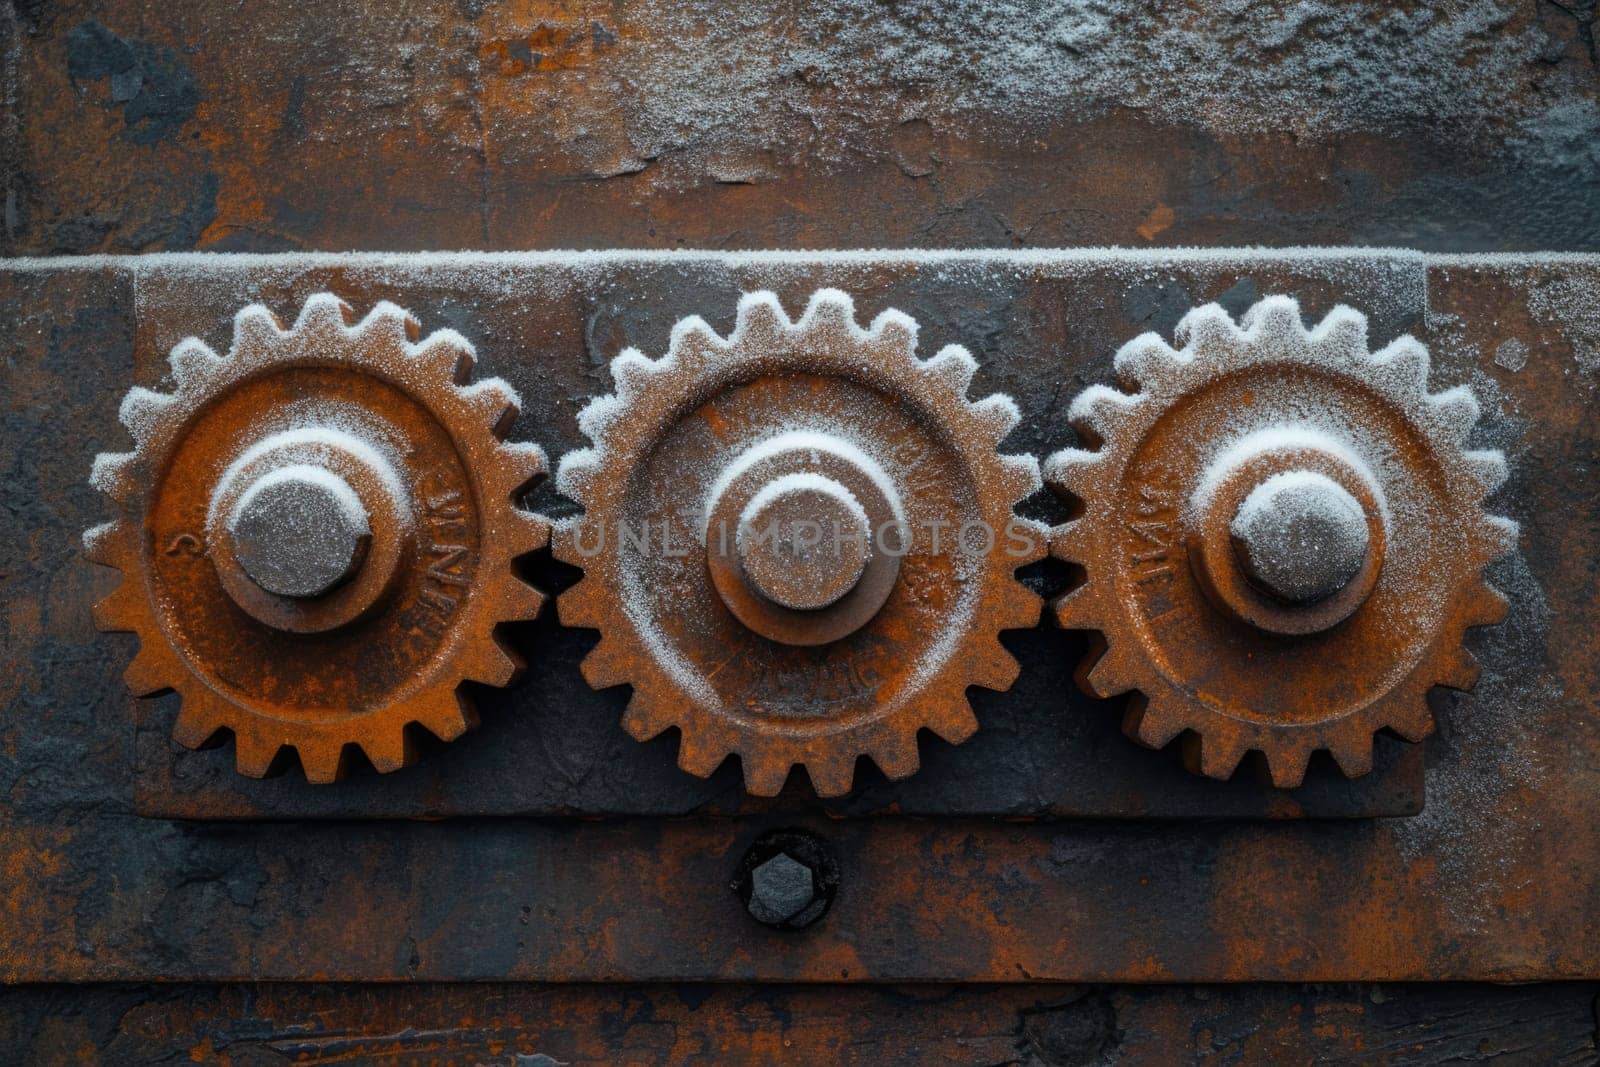 Details The gear is made of metal. Mechanical gears made of steel.